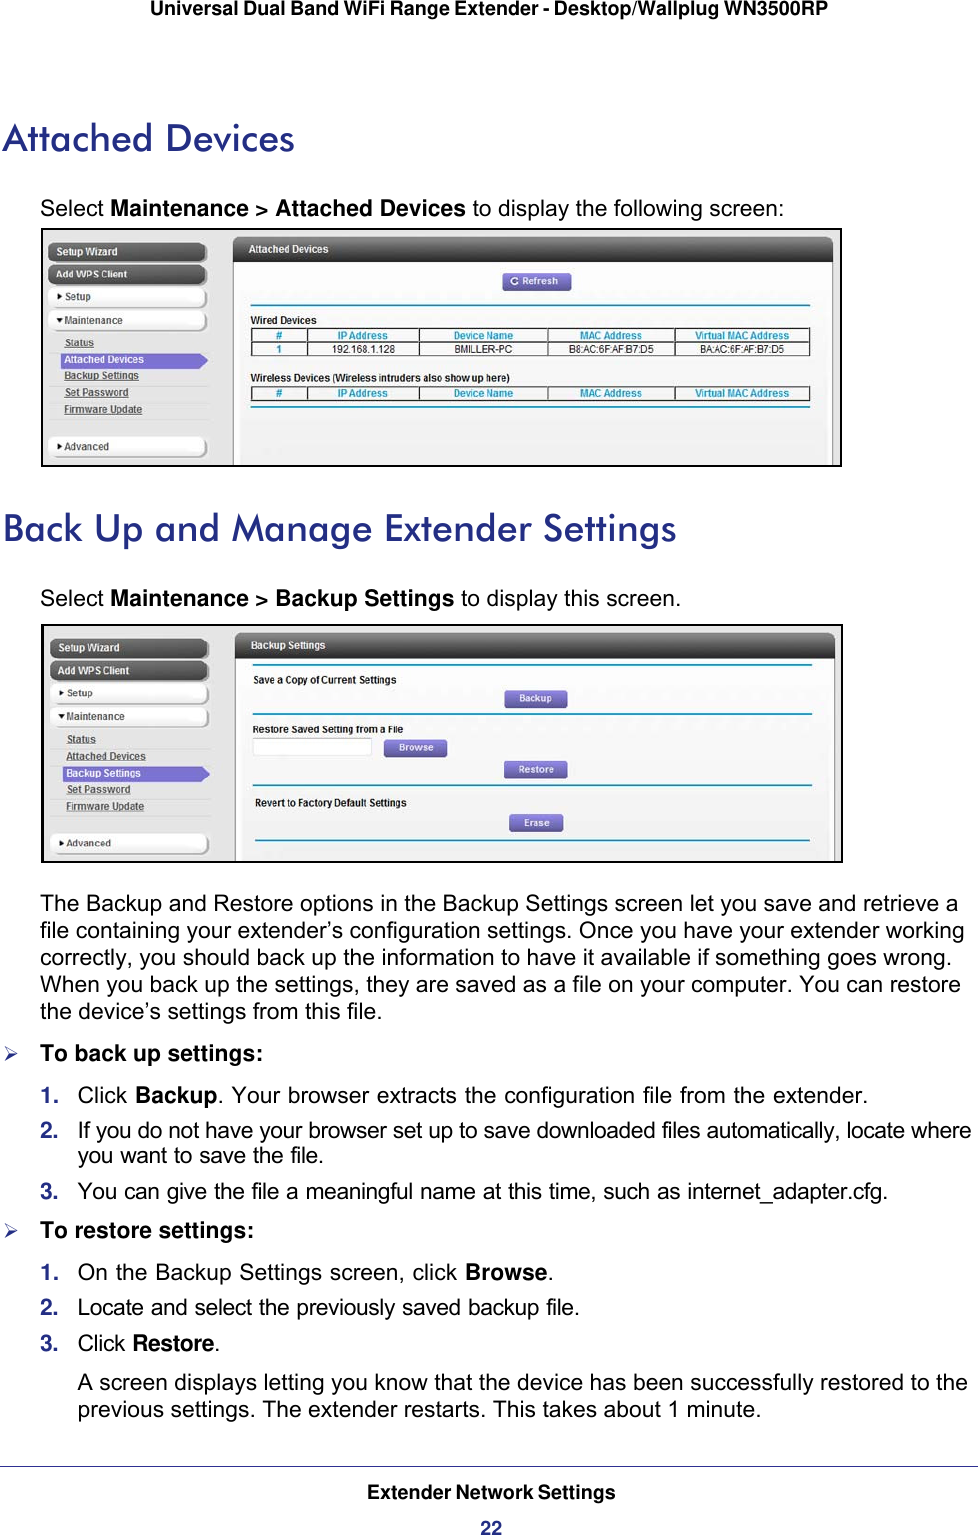 Extender Network Settings22Universal Dual Band WiFi Range Extender - Desktop/Wallplug WN3500RP Attached DevicesSelect Maintenance &gt; Attached Devices to display the following screen:Back Up and Manage Extender SettingsSelect Maintenance &gt; Backup Settings to display this screen.The Backup and Restore options in the Backup Settings screen let you save and retrieve a file containing your extender’s configuration settings. Once you have your extender working correctly, you should back up the information to have it available if something goes wrong. When you back up the settings, they are saved as a file on your computer. You can restore the device’s settings from this file.To back up settings:1.  Click Backup. Your browser extracts the configuration file from the extender.2.  If you do not have your browser set up to save downloaded files automatically, locate where you want to save the file. 3.  You can give the file a meaningful name at this time, such as internet_adapter.cfg. To restore settings:1.  On the Backup Settings screen, click Browse.2.  Locate and select the previously saved backup file.3.  Click Restore.A screen displays letting you know that the device has been successfully restored to the previous settings. The extender restarts. This takes about 1 minute.